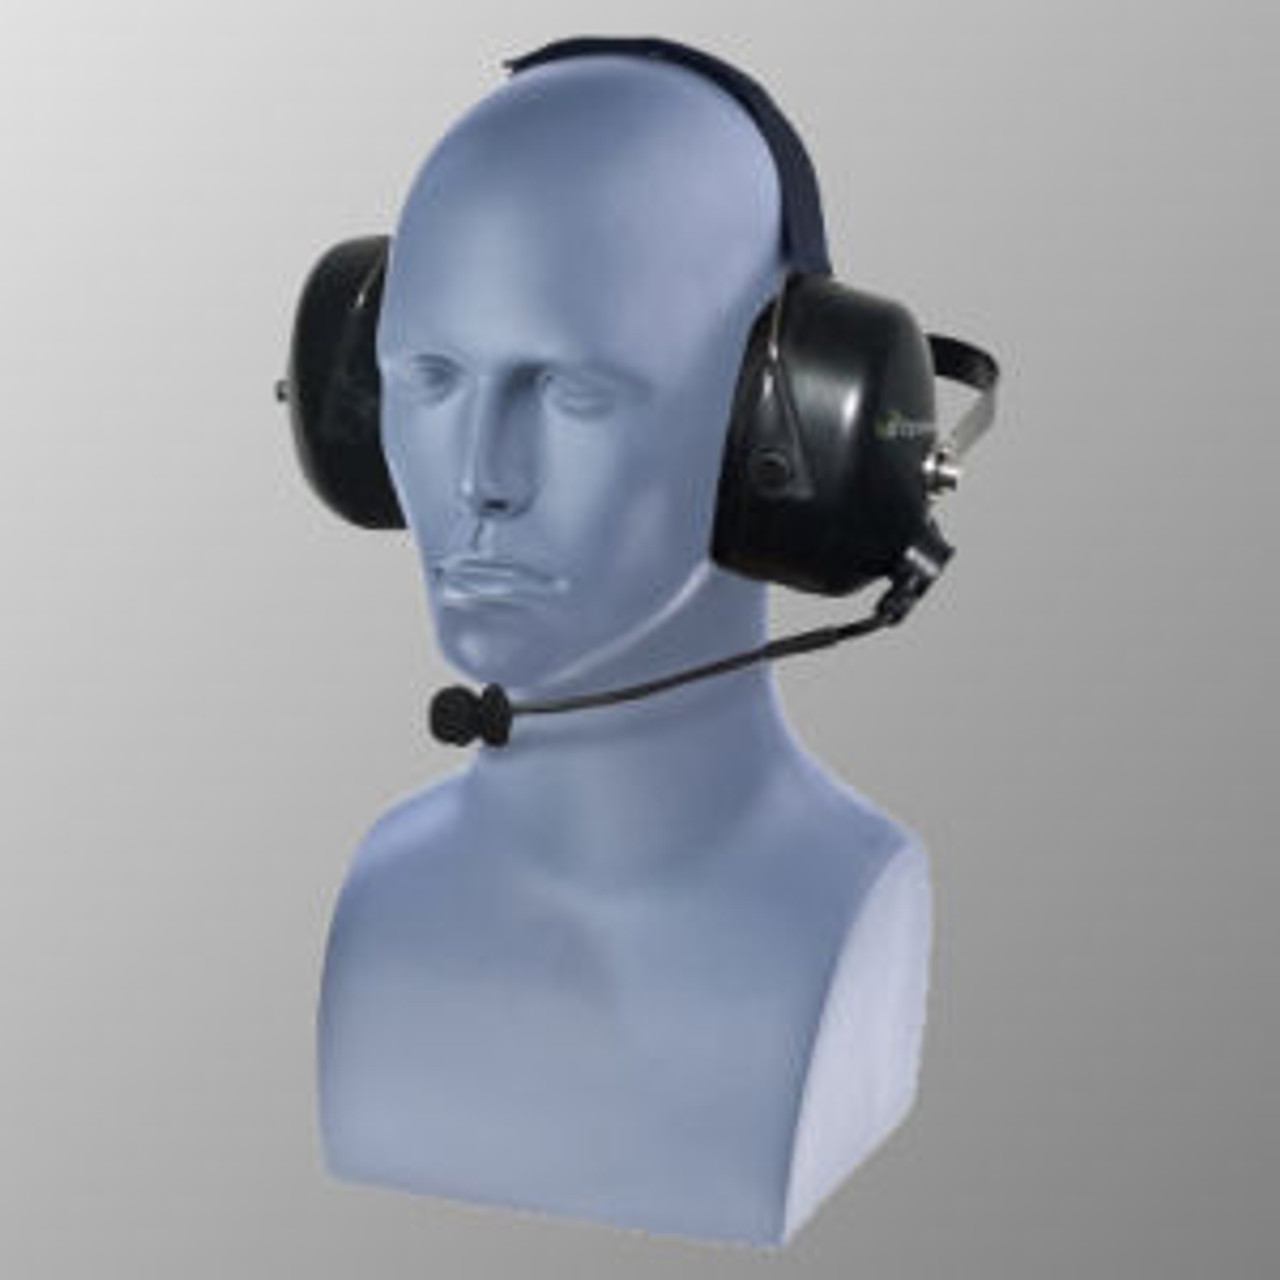 Kenwood NX-5300 Noise Canceling Double Muff Behind The Head Headset